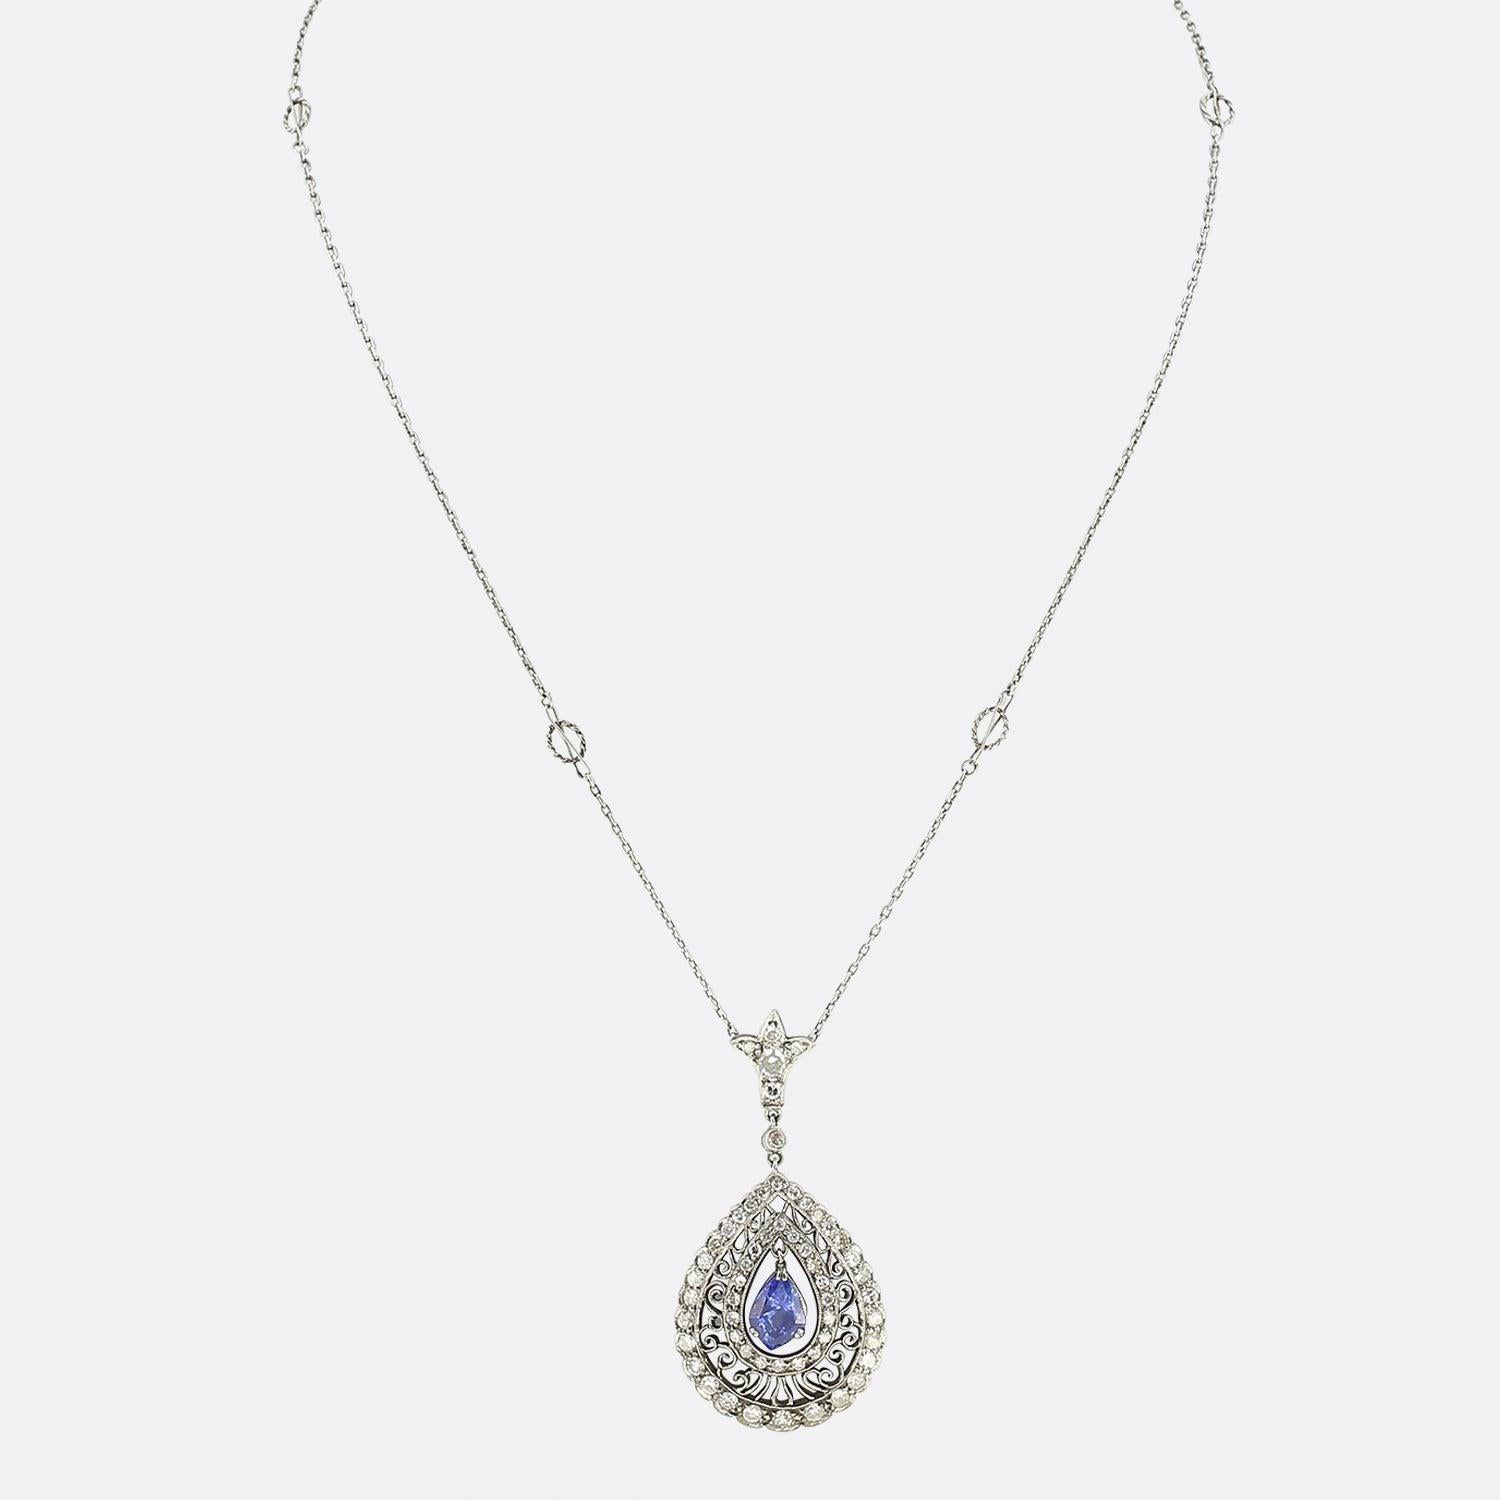 This is a magnificent vintage sapphire and diamond drop necklace. The necklace features a central unheated blue sapphire that has been claw set and moves freely within the setting. Surrounding the sapphire are two halos of single cut diamonds with